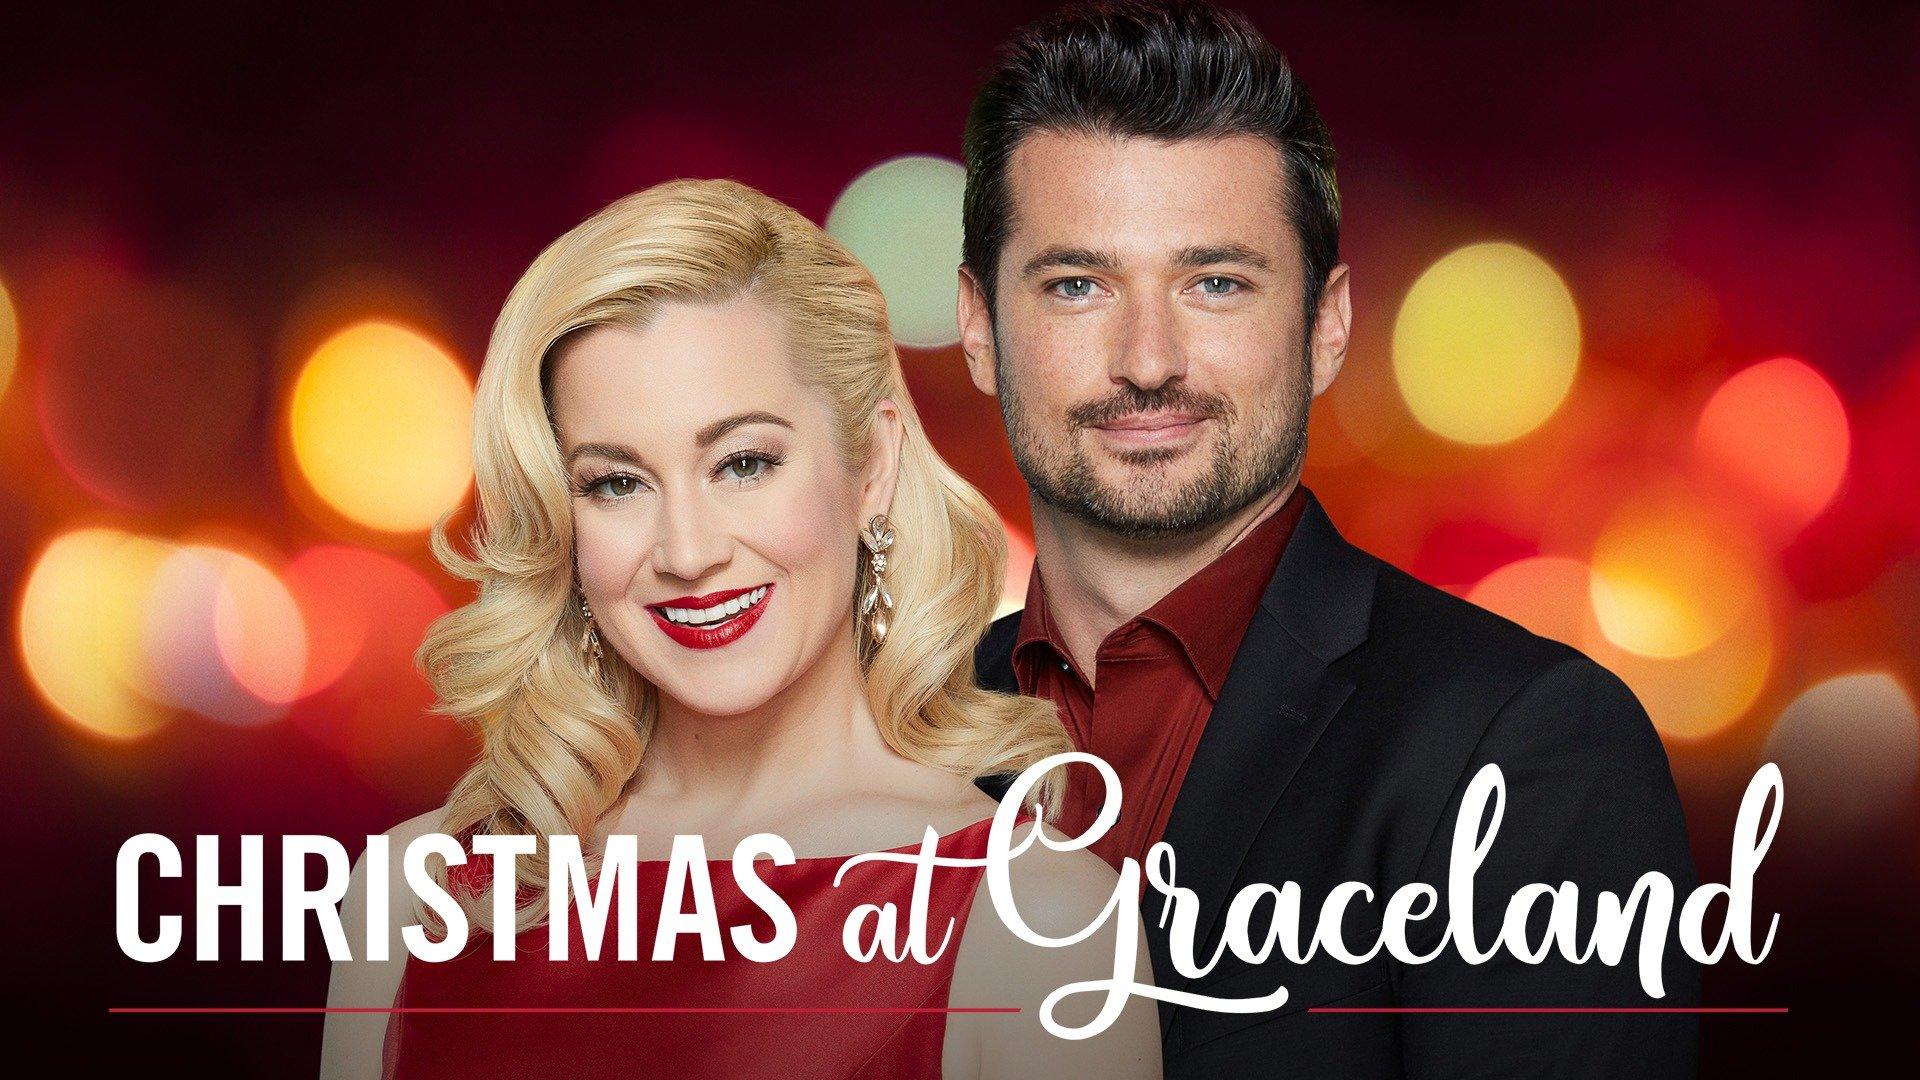 Watch Christmas at Graceland Streaming Online on Philo (Free Trial)